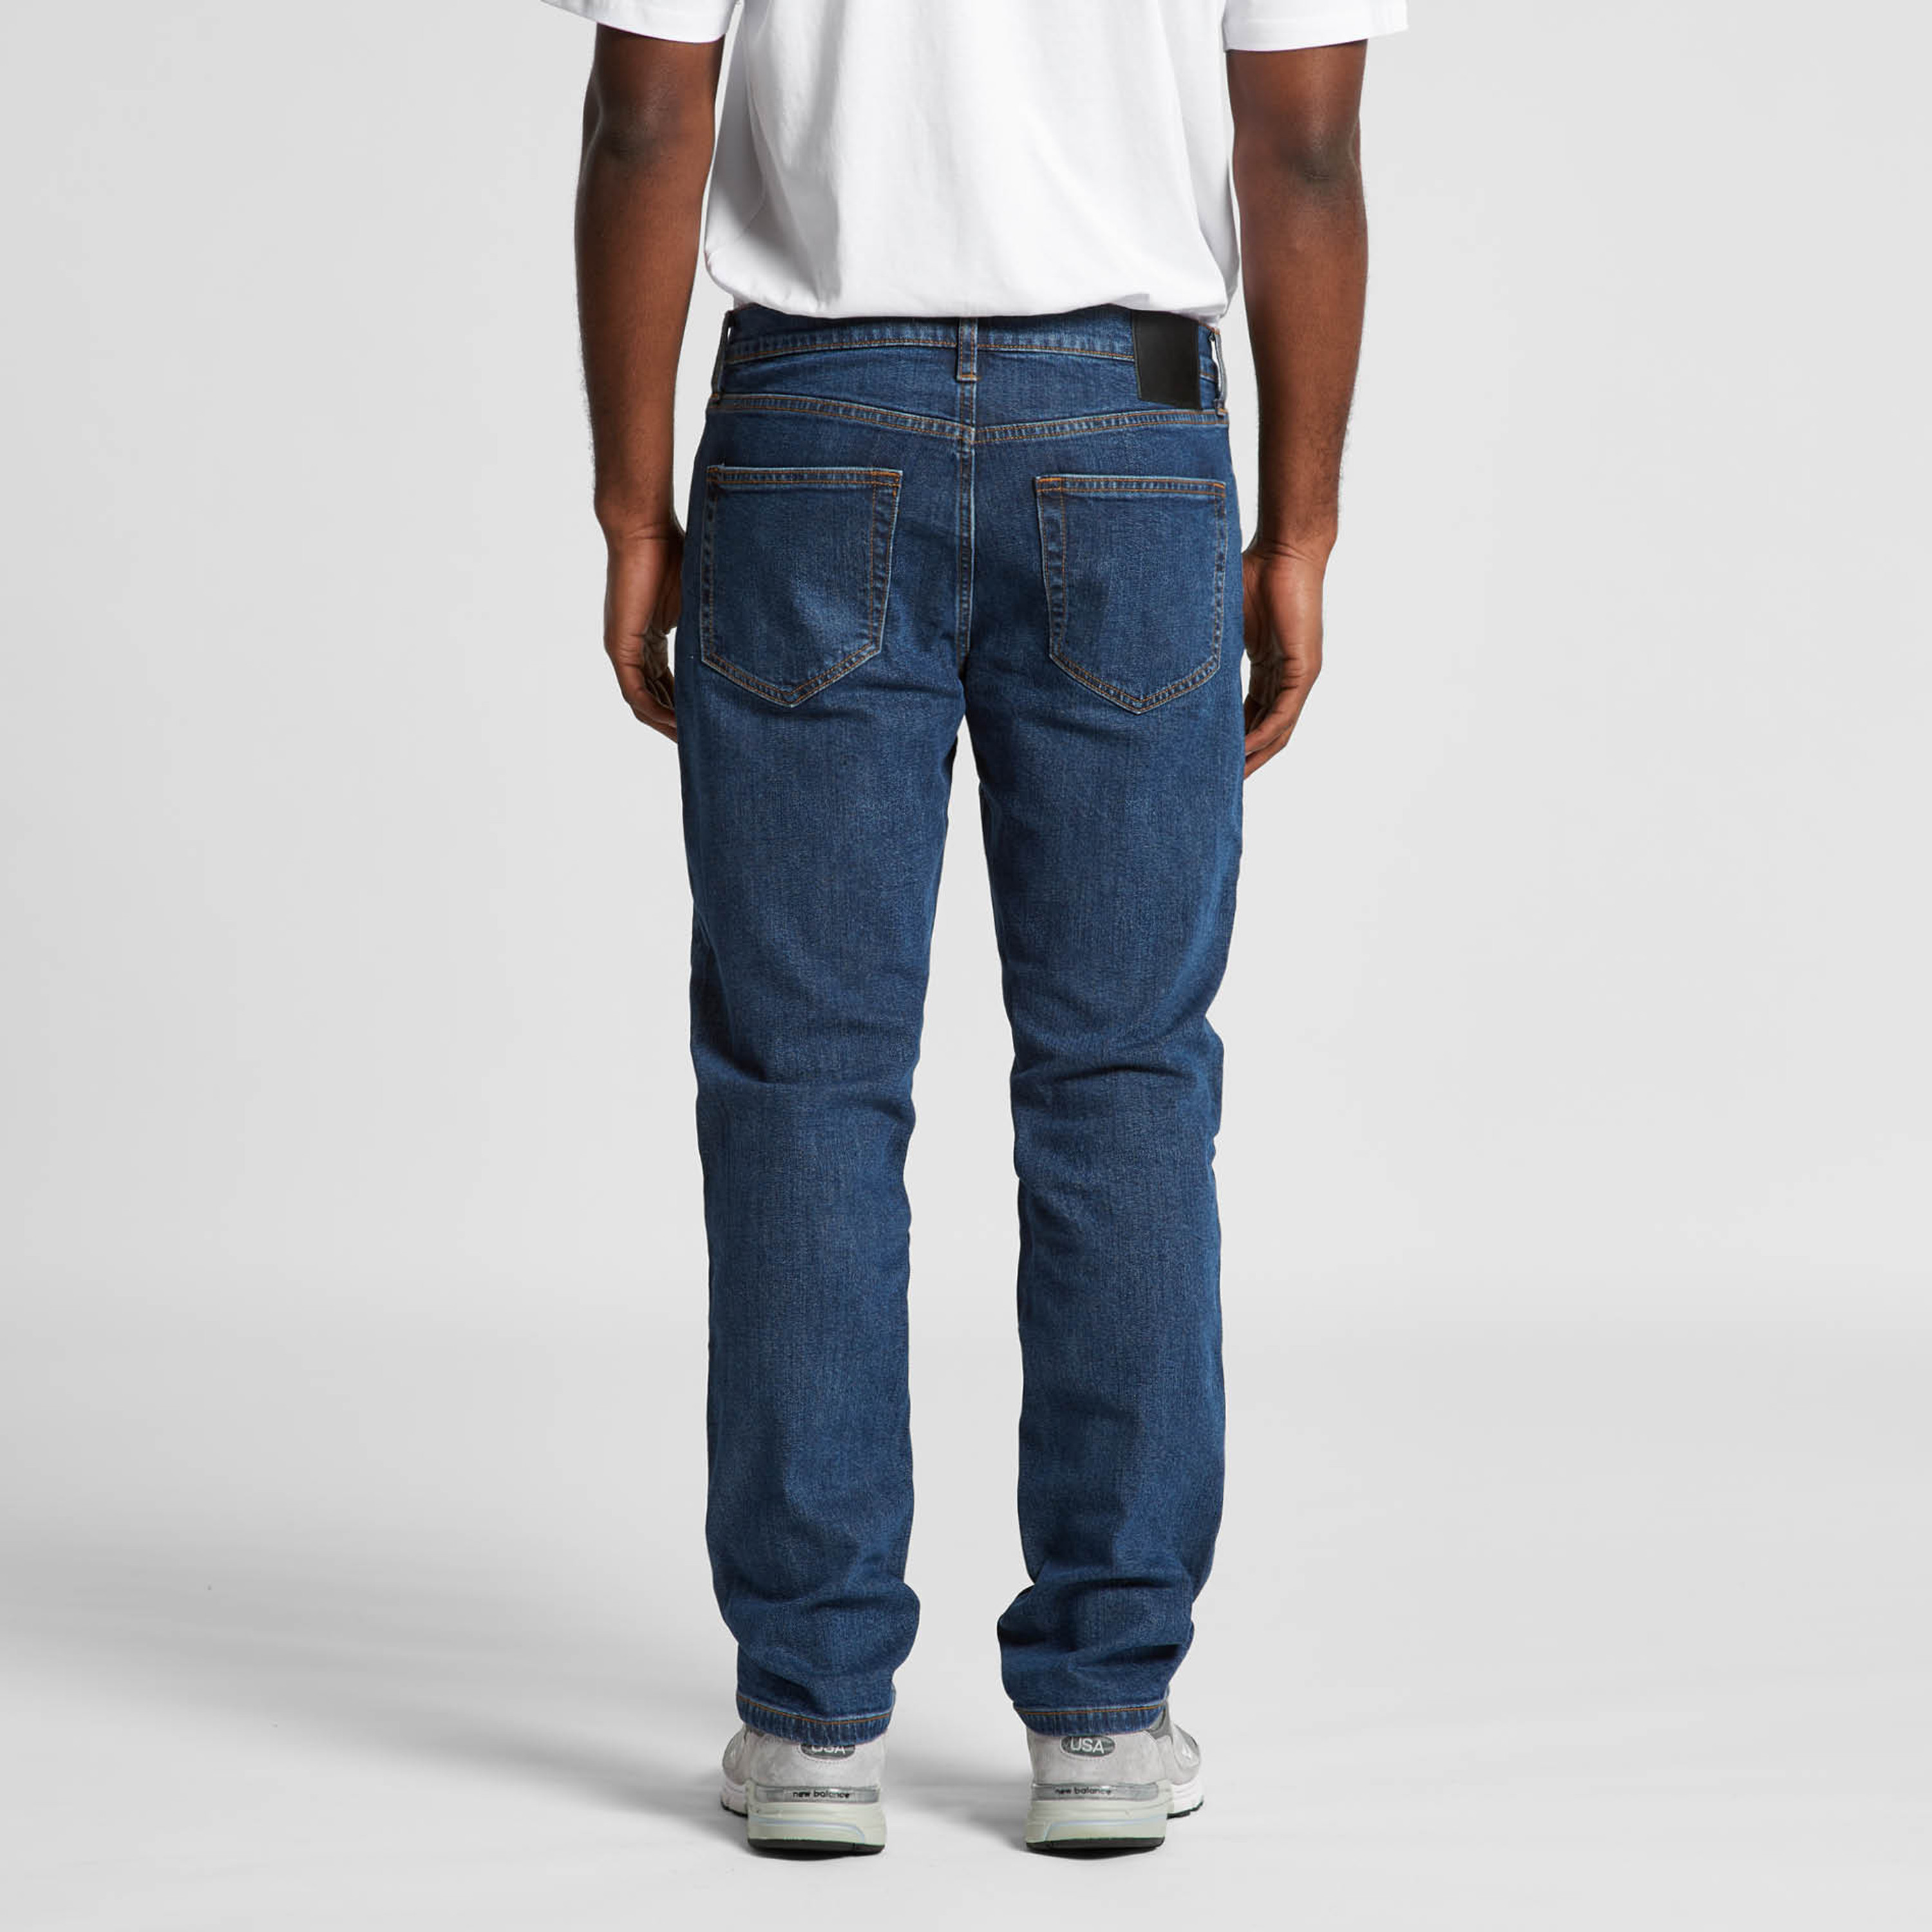 EIGHTYFIVE BAGGY JEANS - Relaxed fit jeans - midnight blue/stone